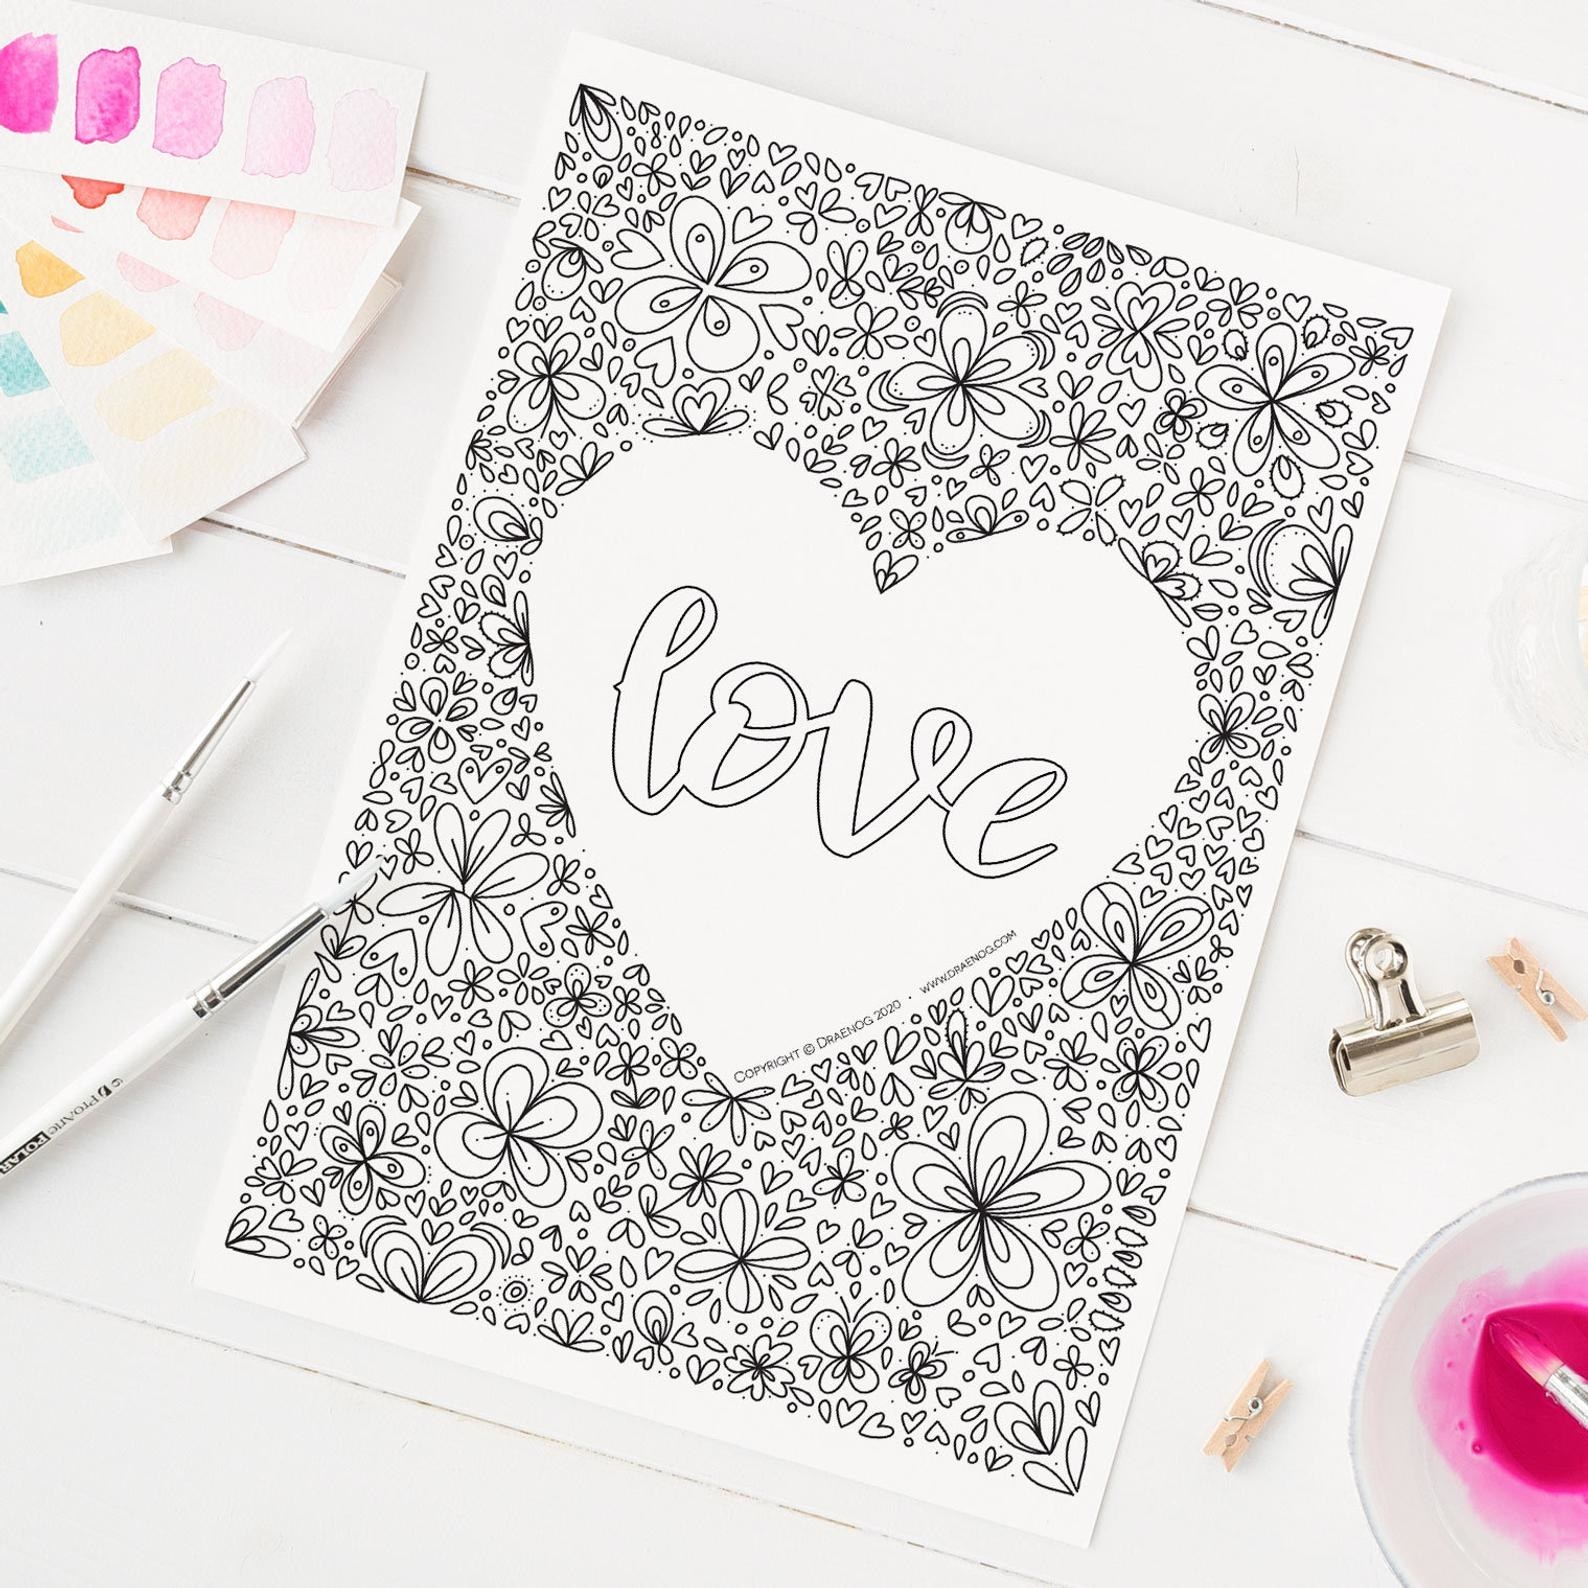 Printable coloring pages to help you instantly start de